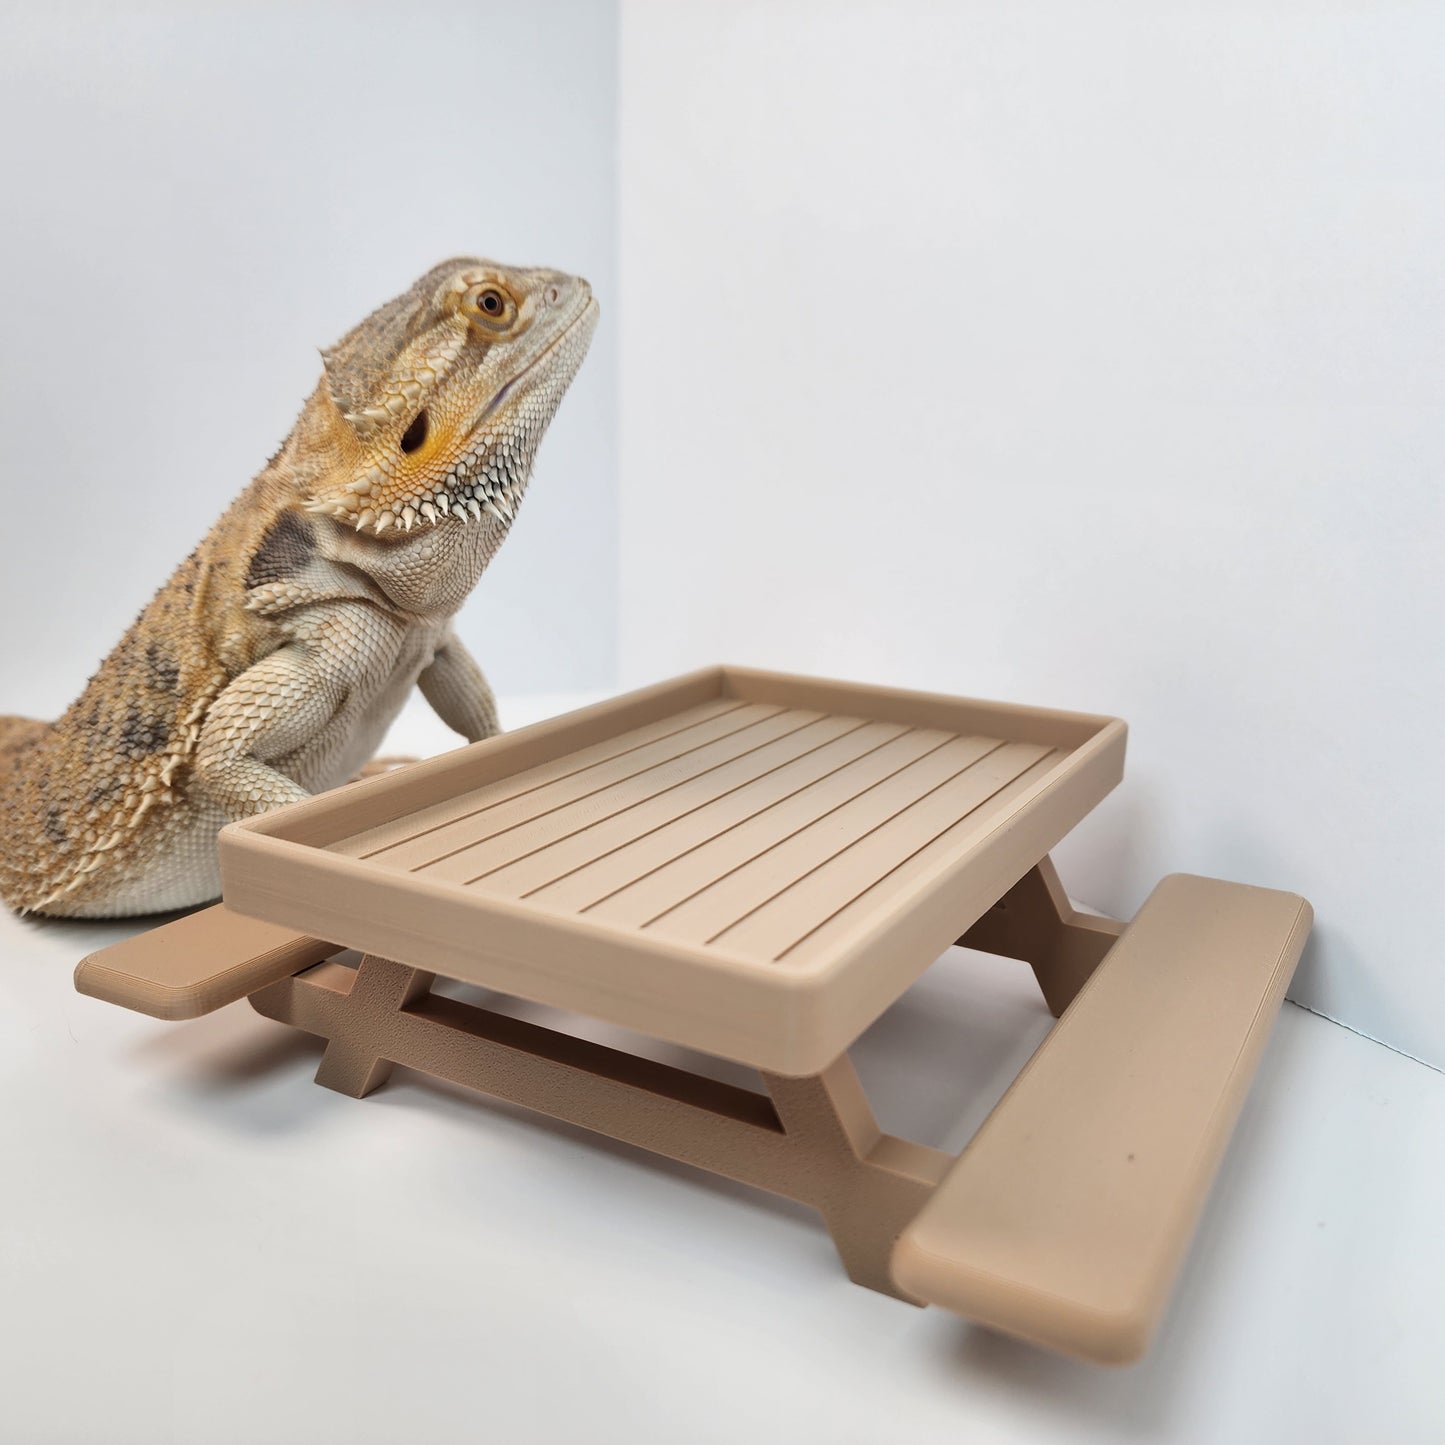 Reptile Picnic Table / Large food dish for bearded dragon / miniature Picnic table  / Gecko and reptile decor| EXCLUSIVE COLOR